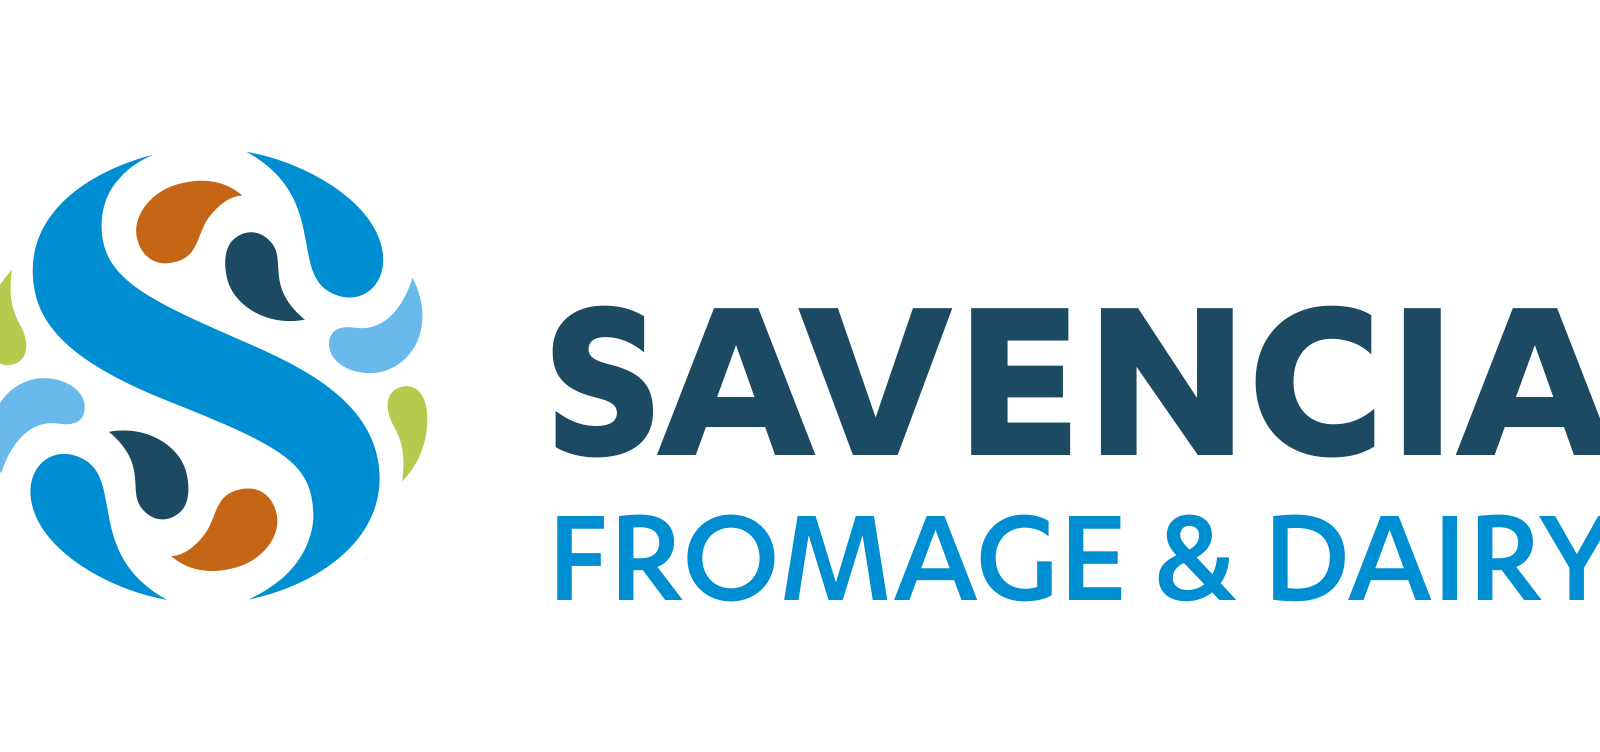 Savencia – Fromage & Dairy